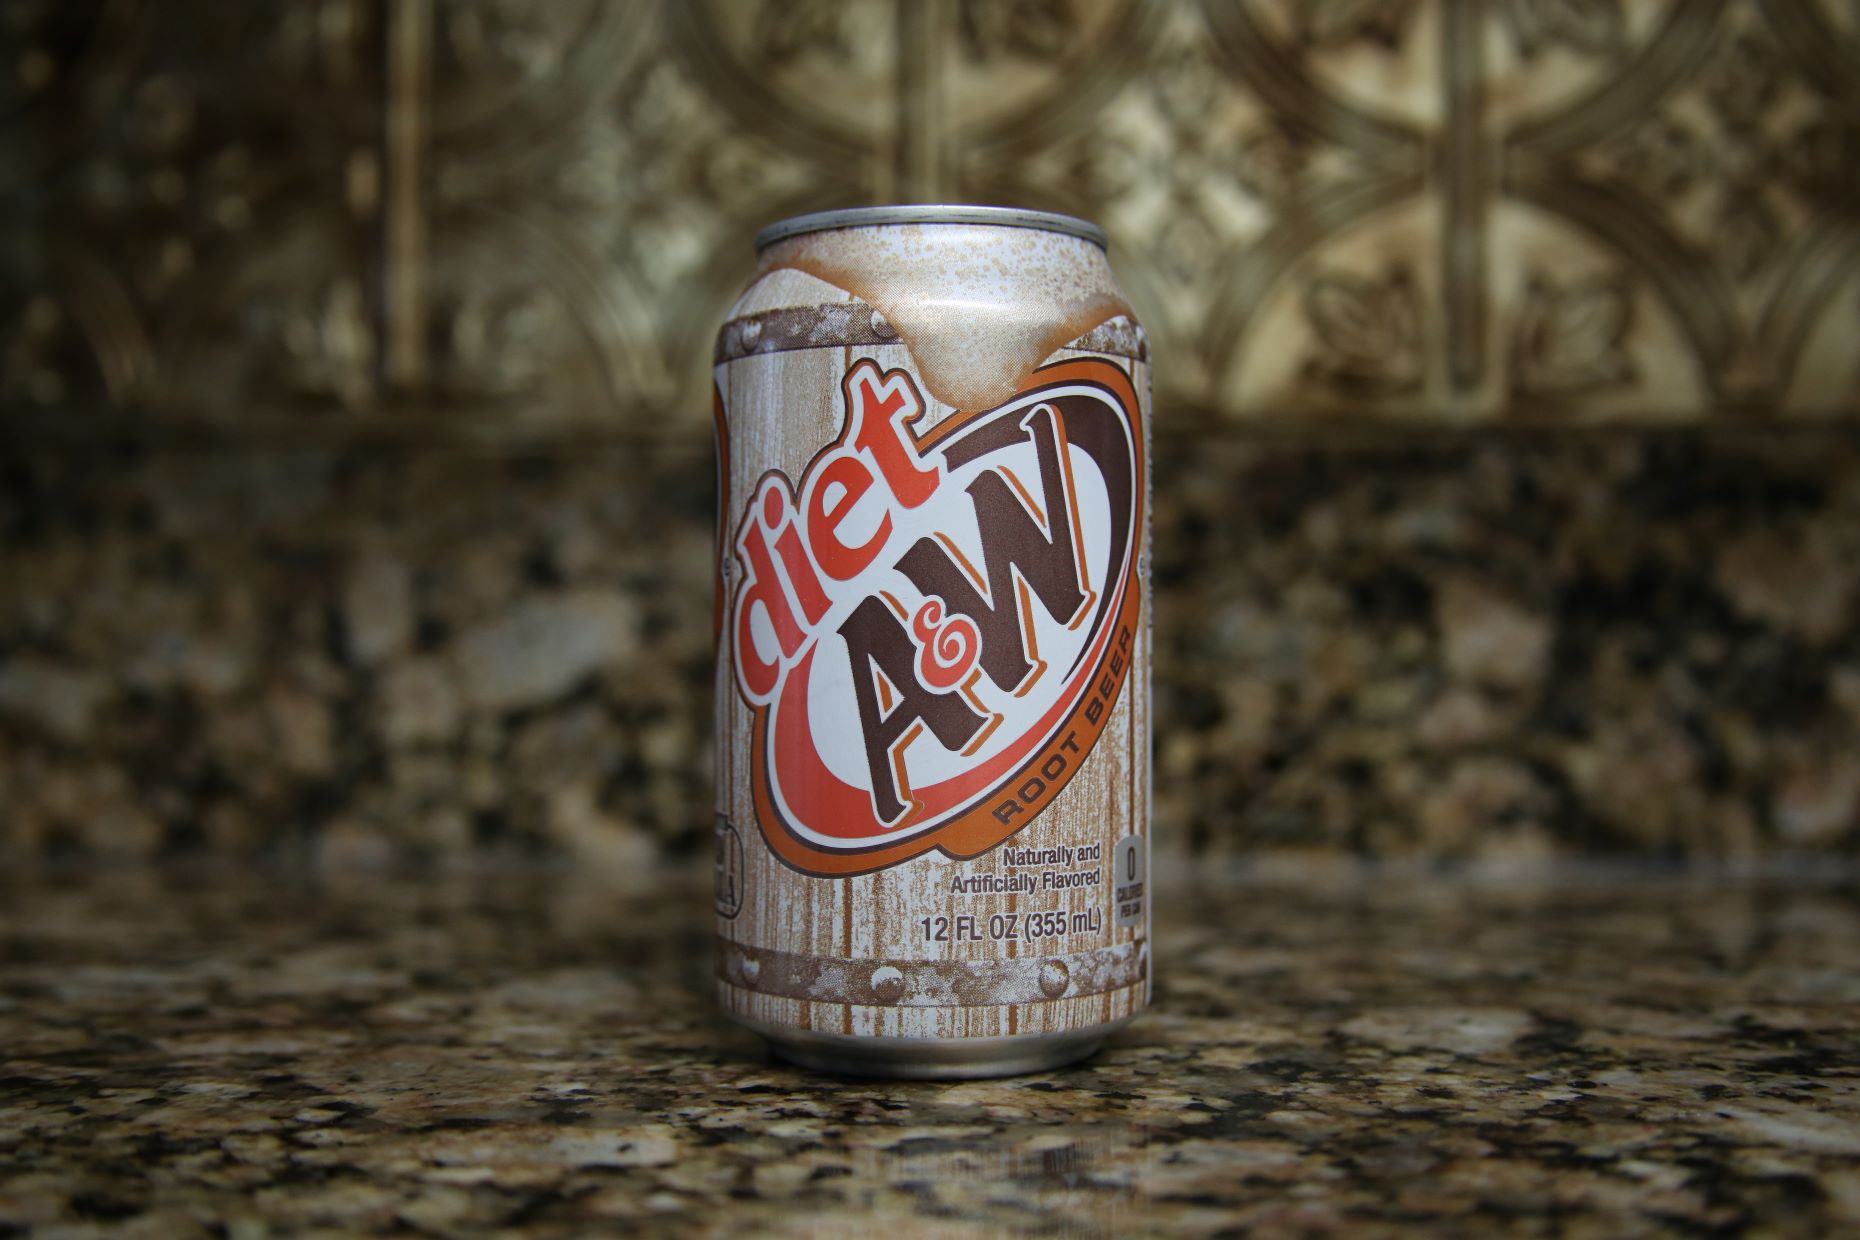 18-diet-root-beer-nutrition-facts